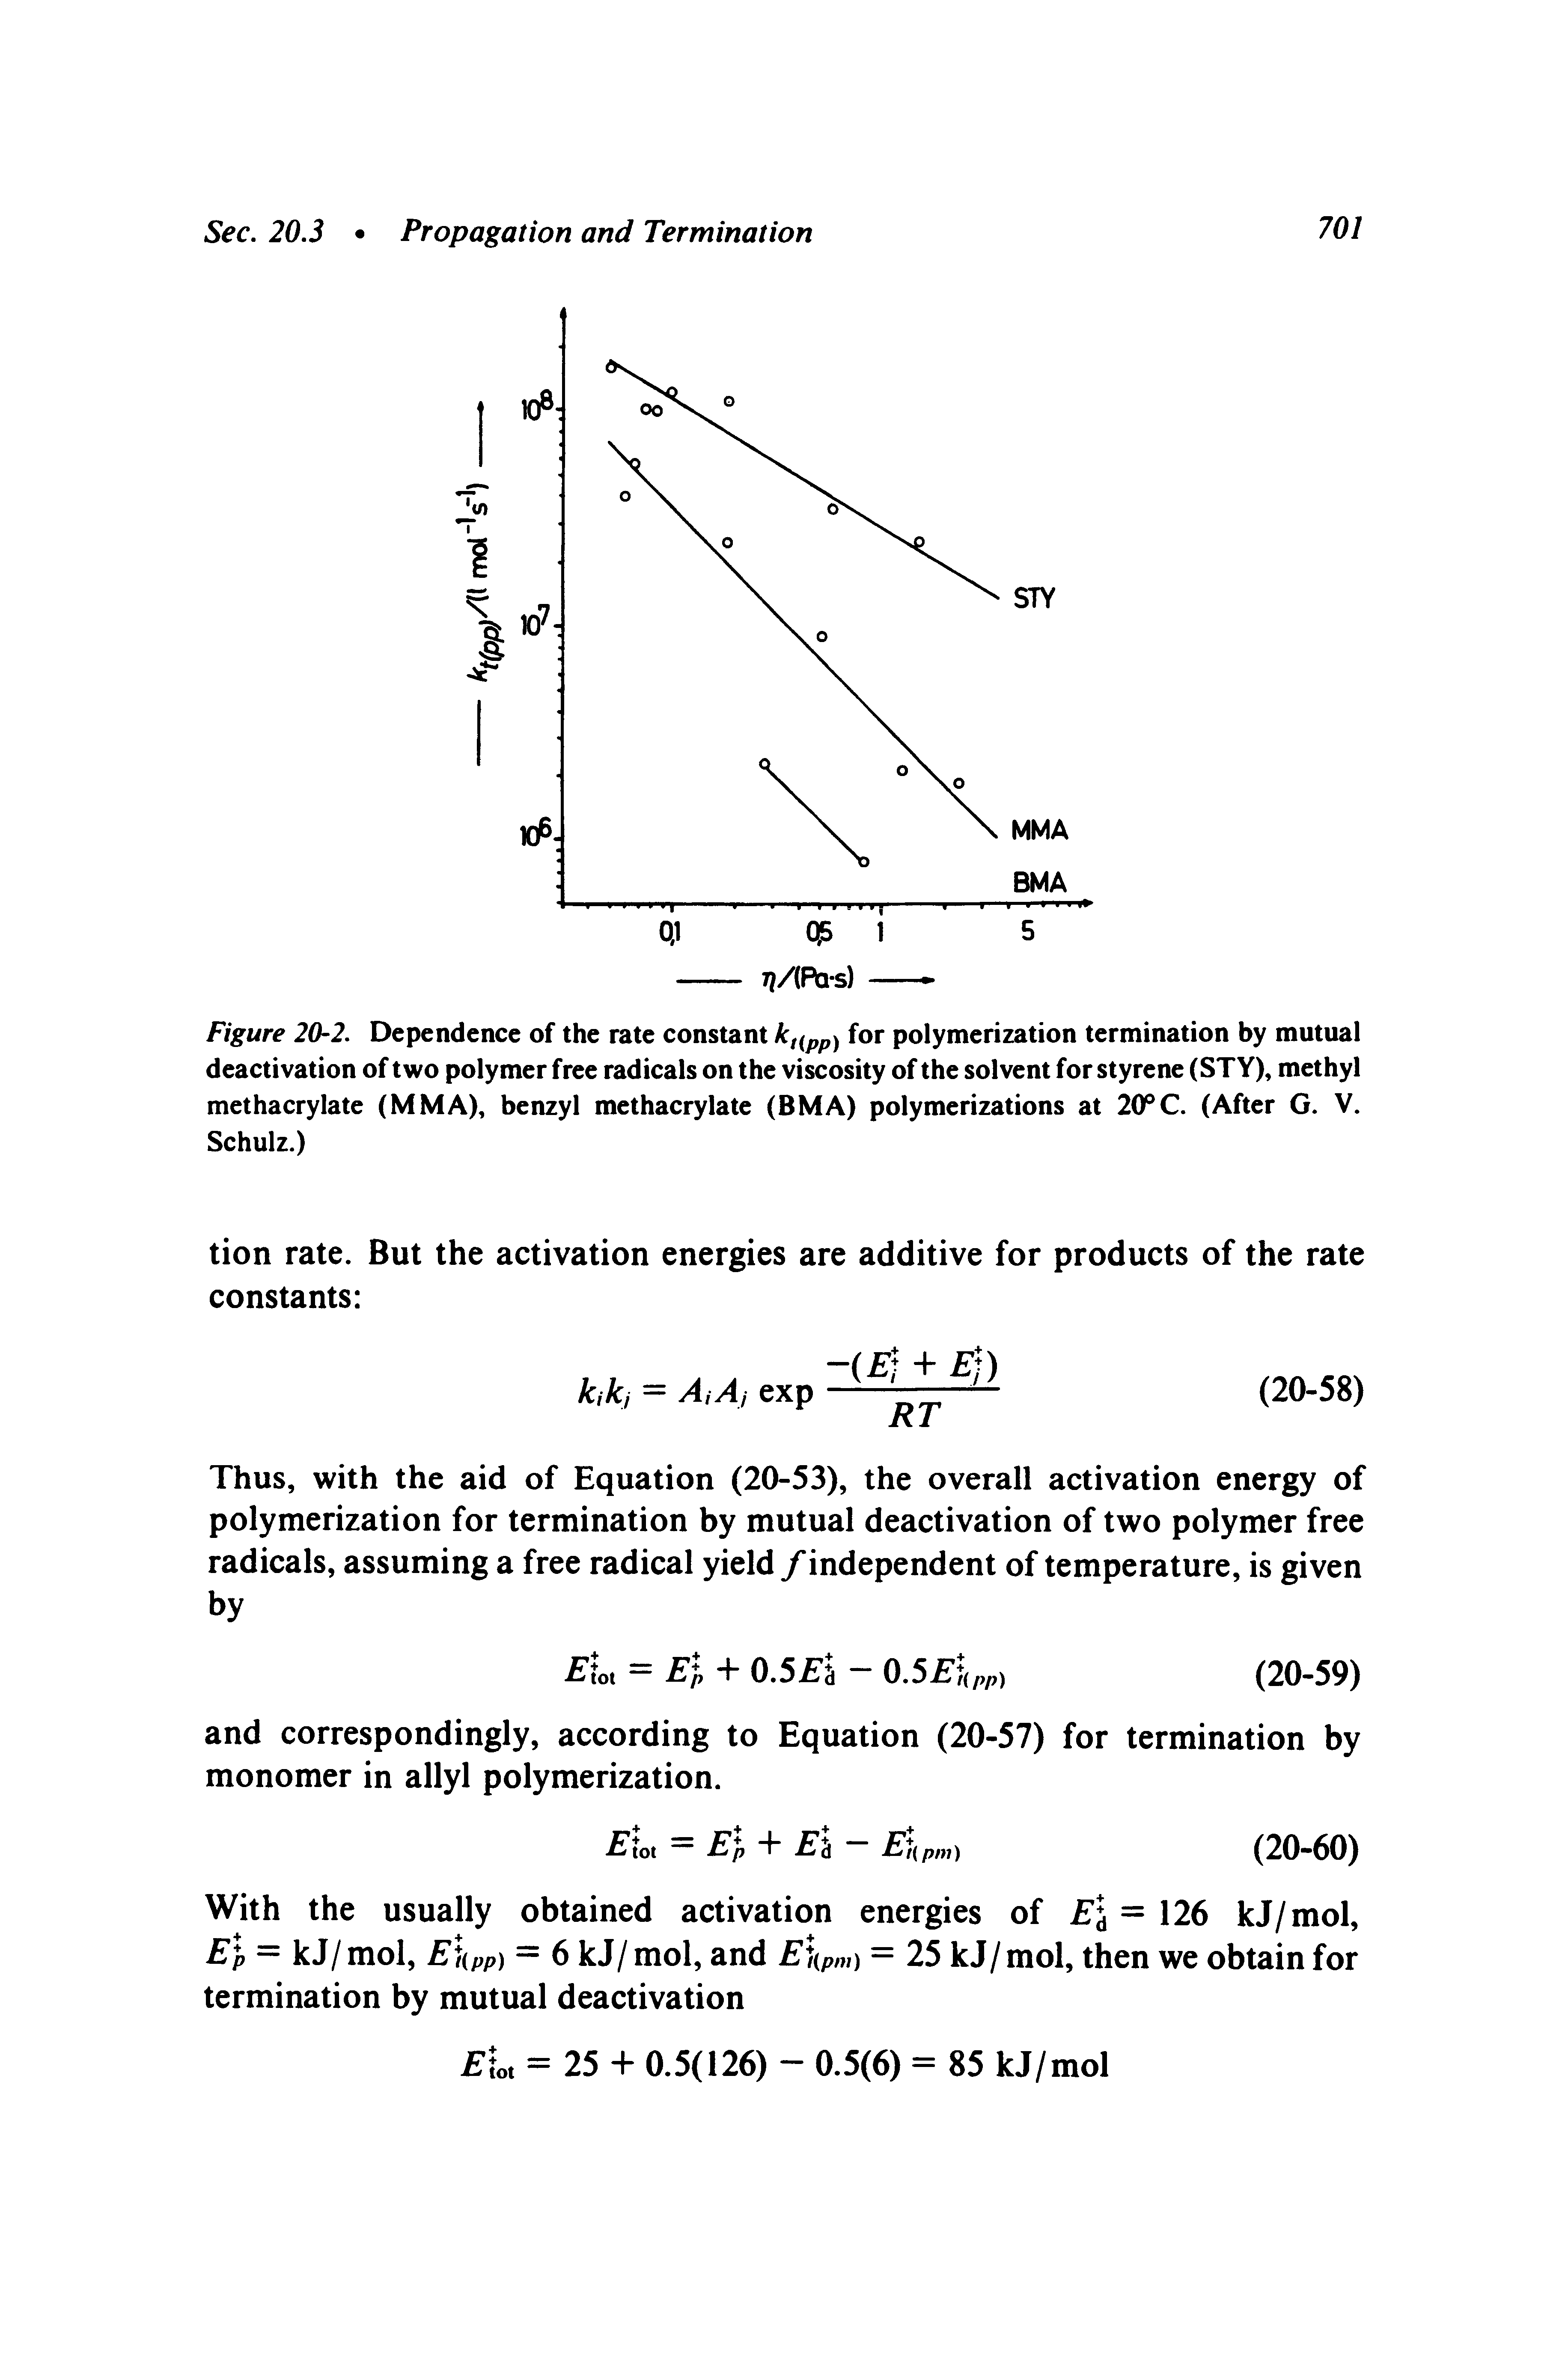 Figure 20-2. Dependence of the rate constant for polymerization termination by mutual deactivation of two polymer free radicals on the viscosity of the solvent for styrene (STY), methyl methacrylate (MMA), benzyl methacrylate (BMA) polymerizations at 2(fC. (After G. V. Schulz.)...